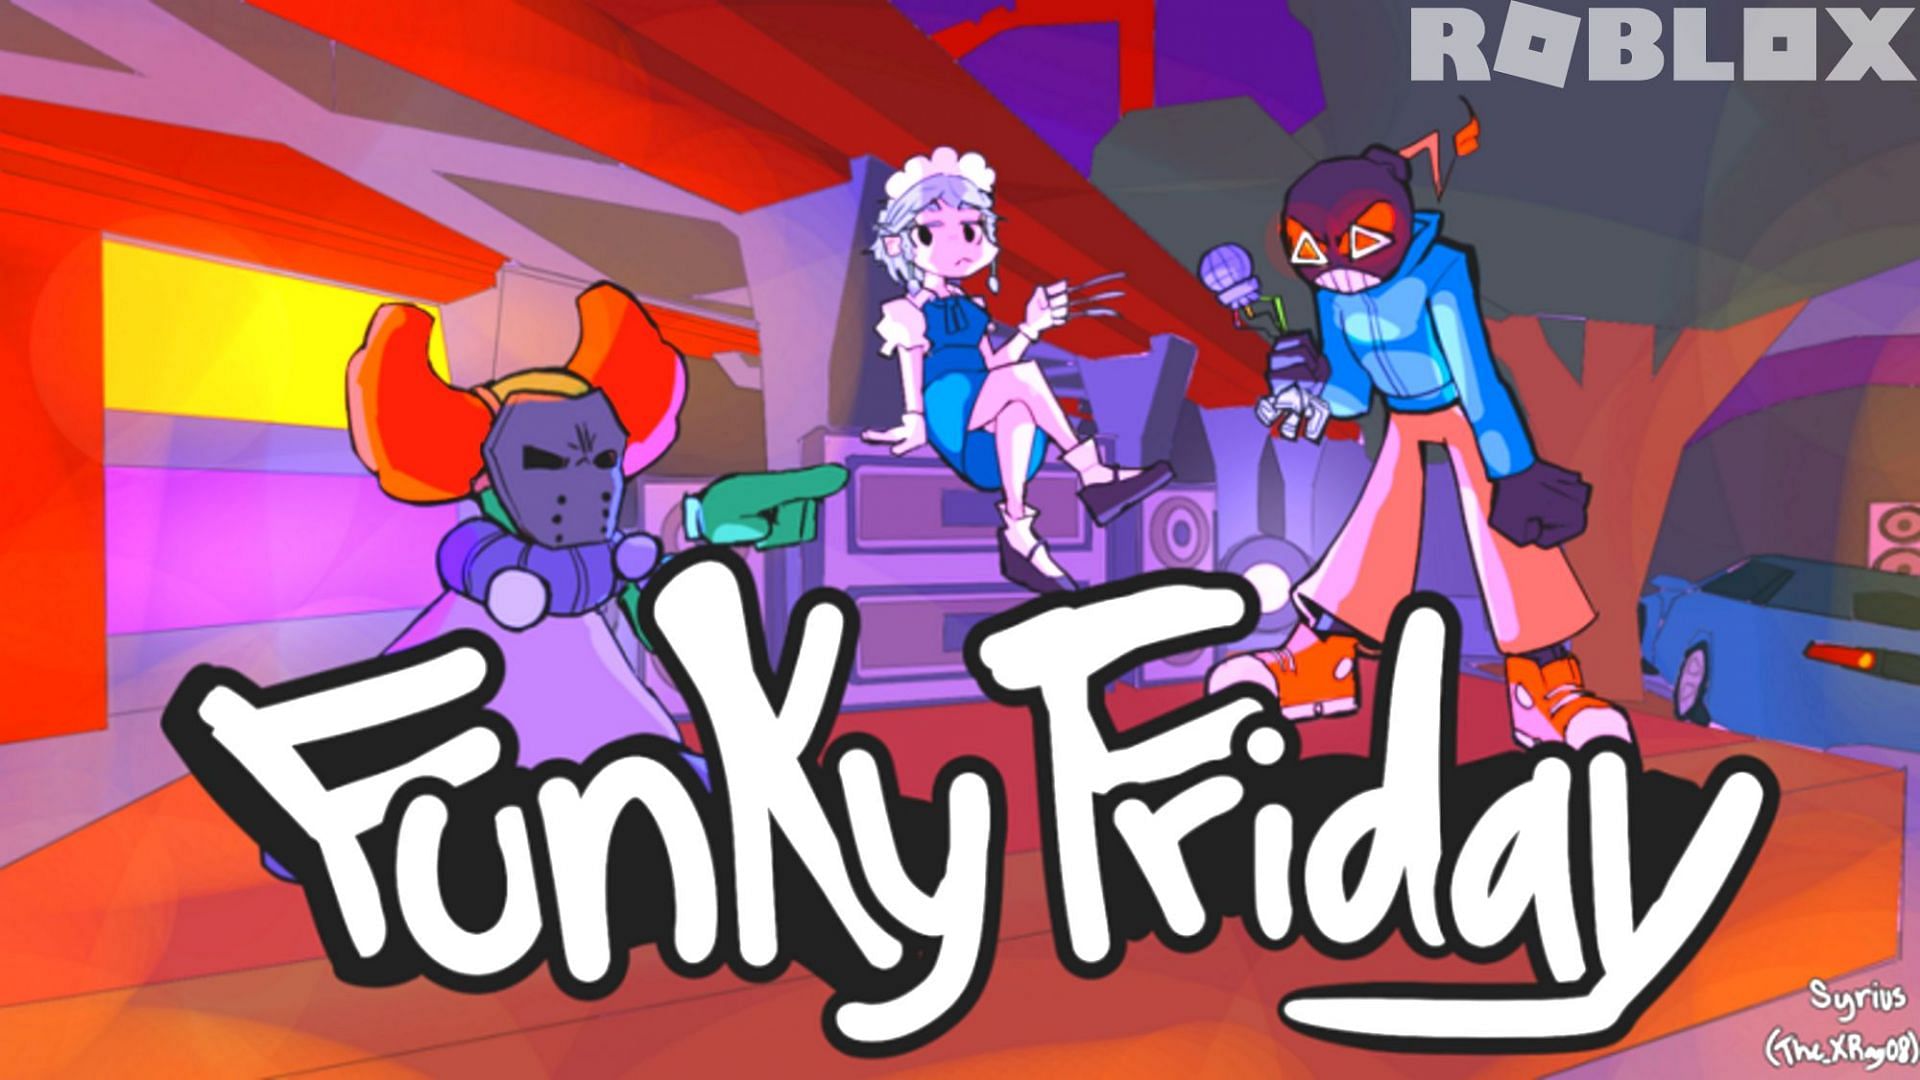 ROBLOX FNF Funky Friday 1v1 Competition with Friends and Fans Live! 